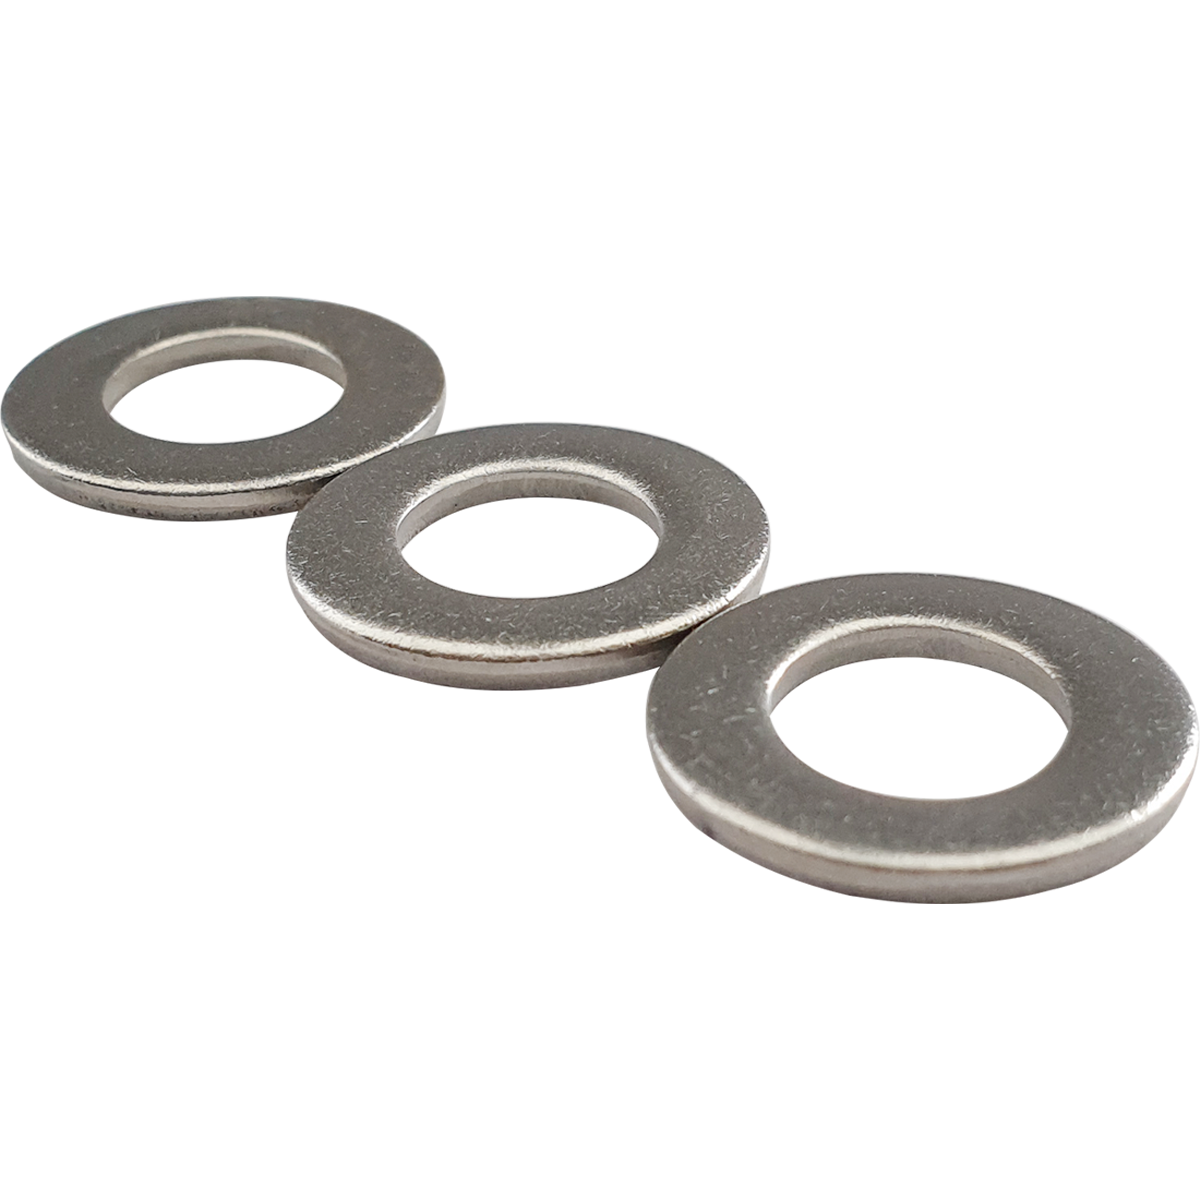 Metric, corrosion-resistant A4 stainless steel 'Form A' flat washers